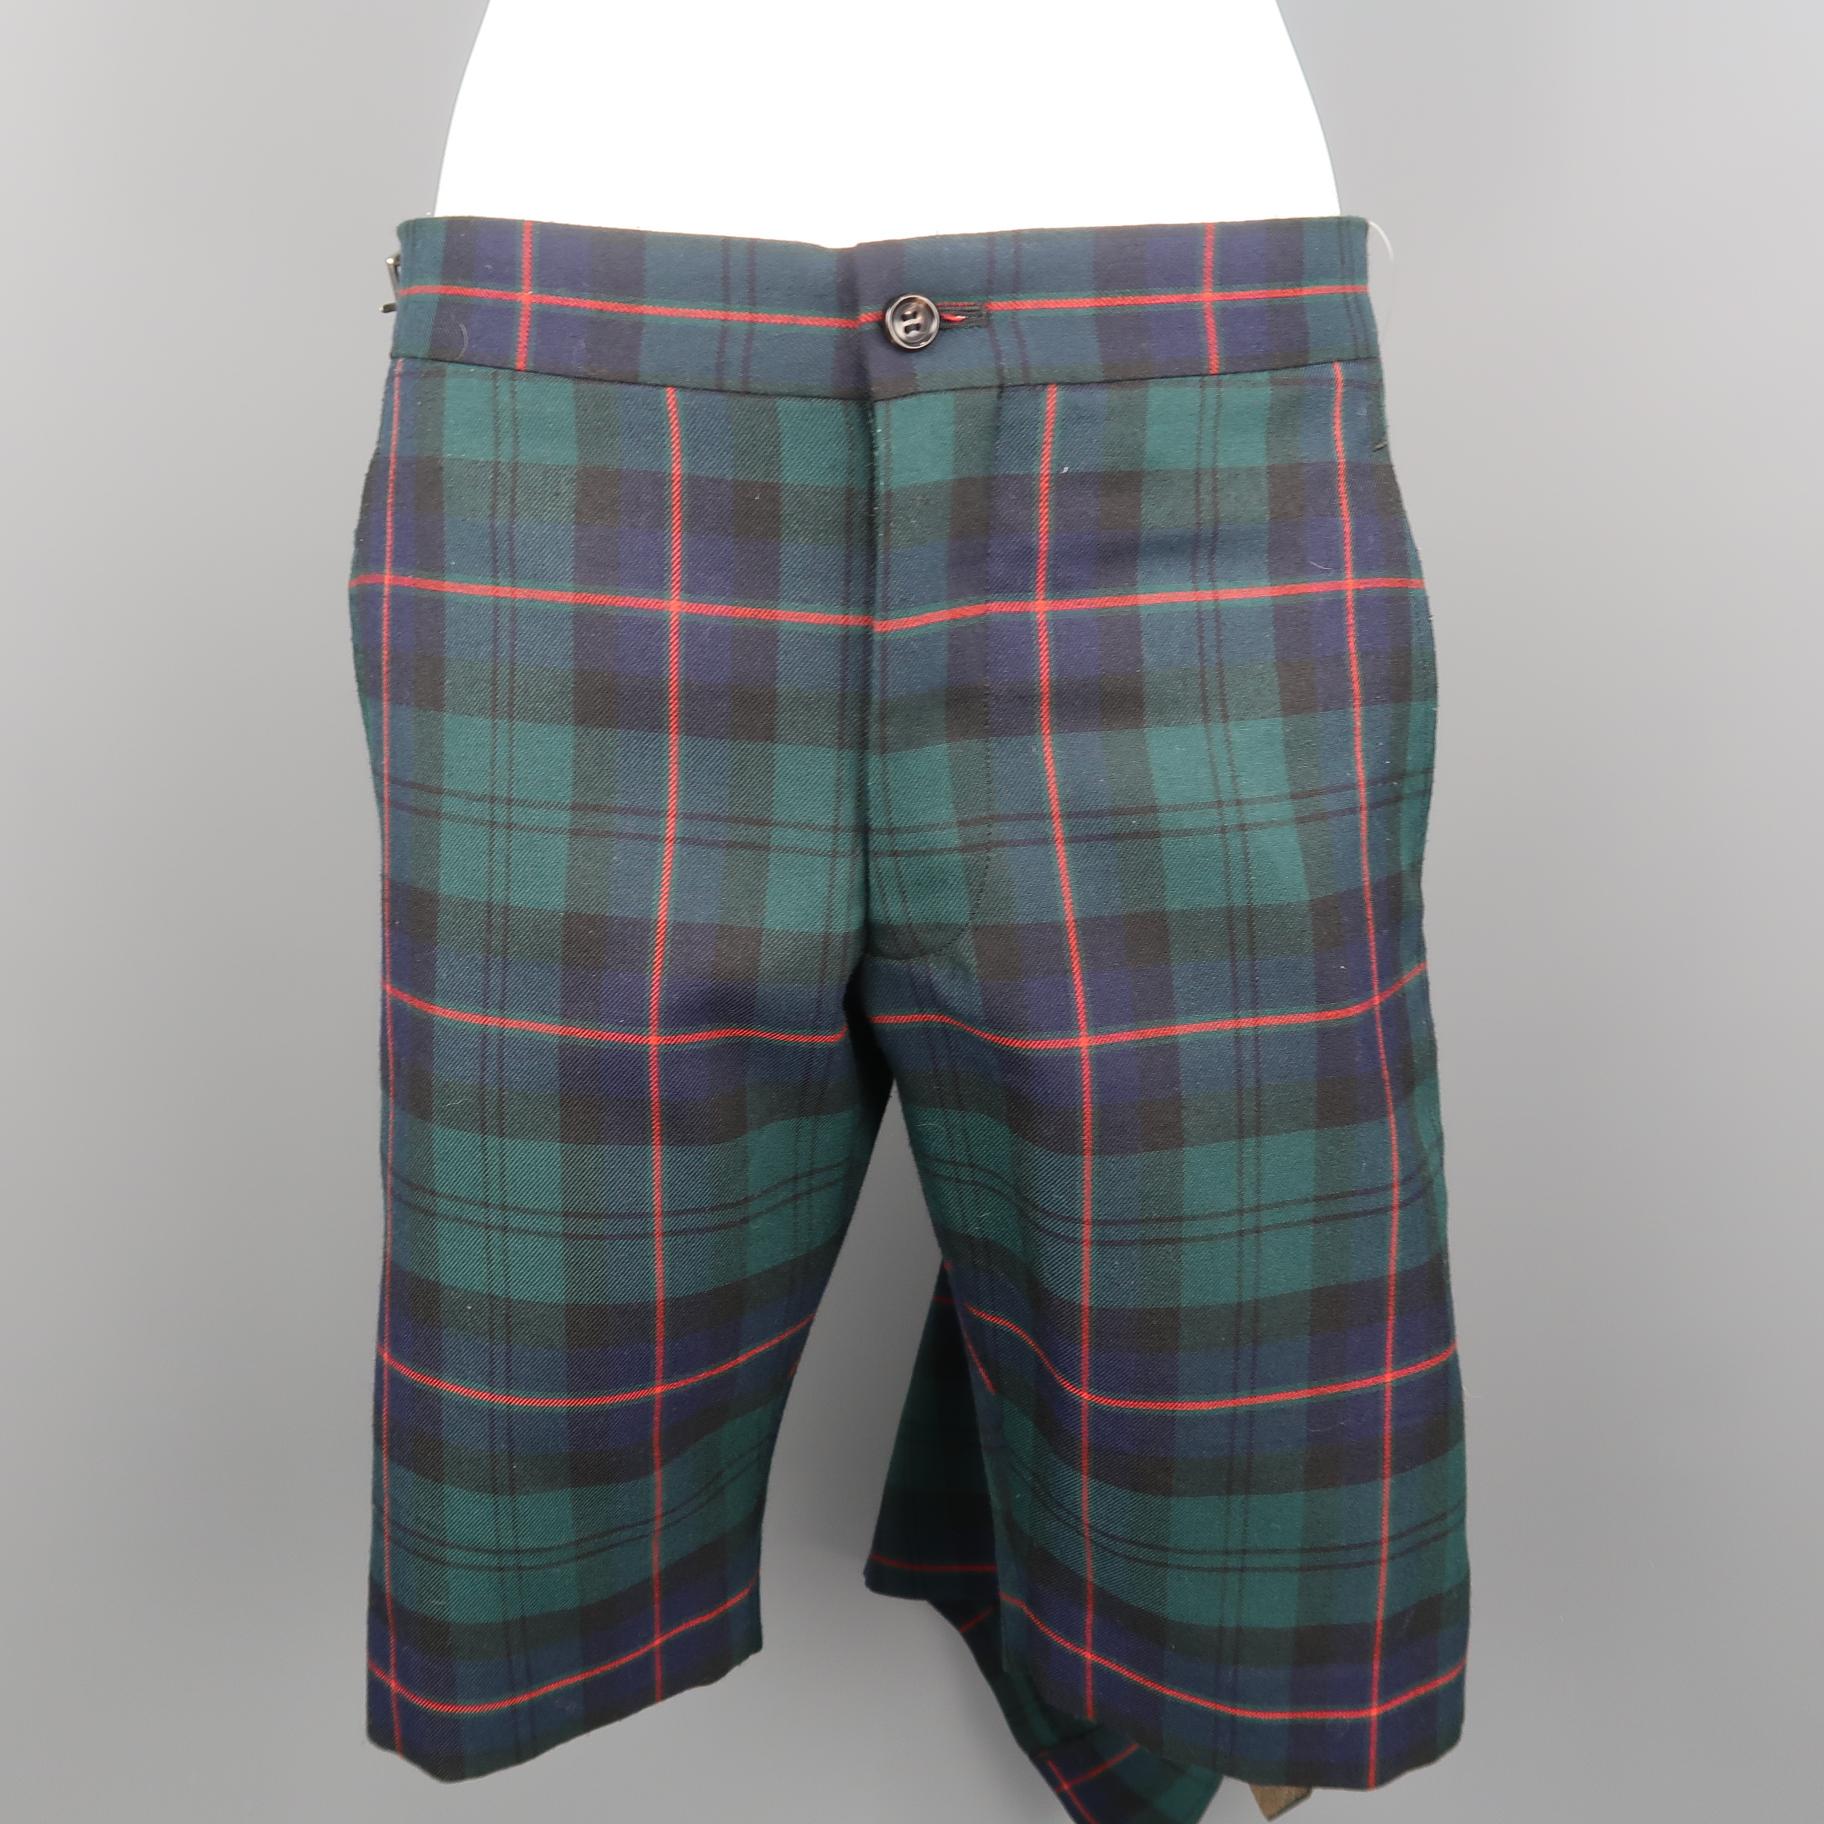 COMME des GARCONS HOMME PLUS shorts come in green, navy, and red tartan plaid wool blend twill with a flat front, half pleated kilt overlay fastened by a black leather side belt tab. Made in Japan.
 
Excellent Pre-Owned Condition.
Marked: XS